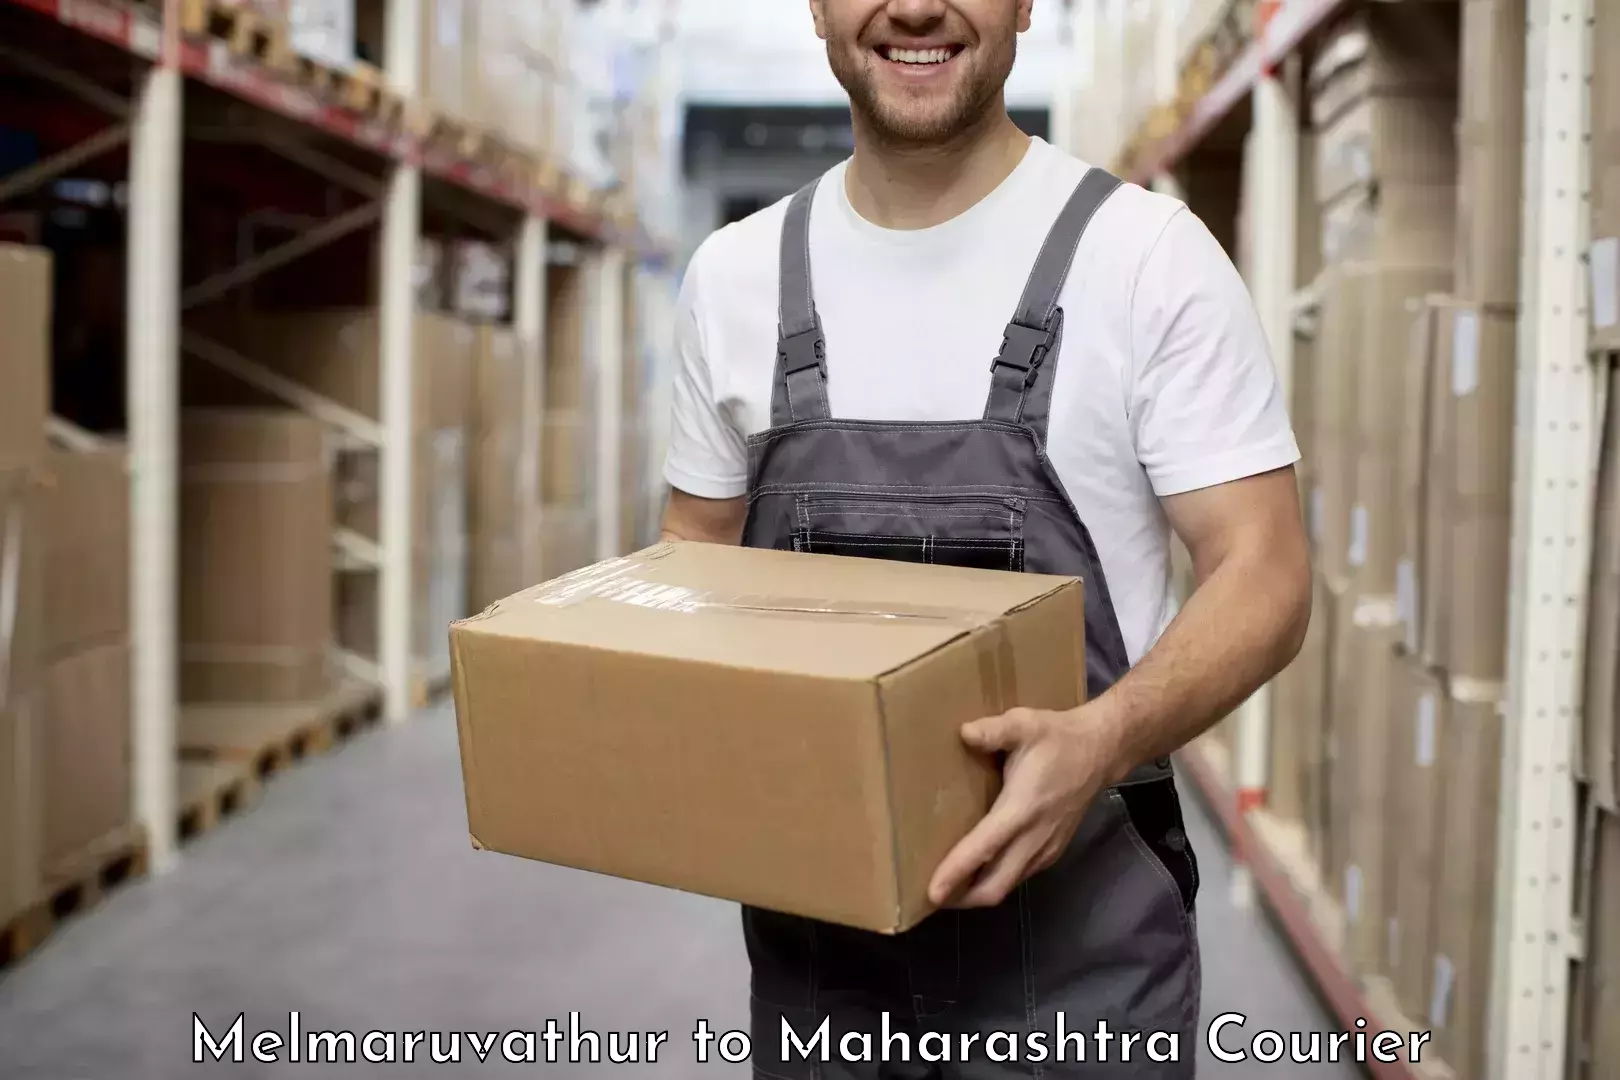 Nationwide courier service in Melmaruvathur to Raigarh Maharashtra